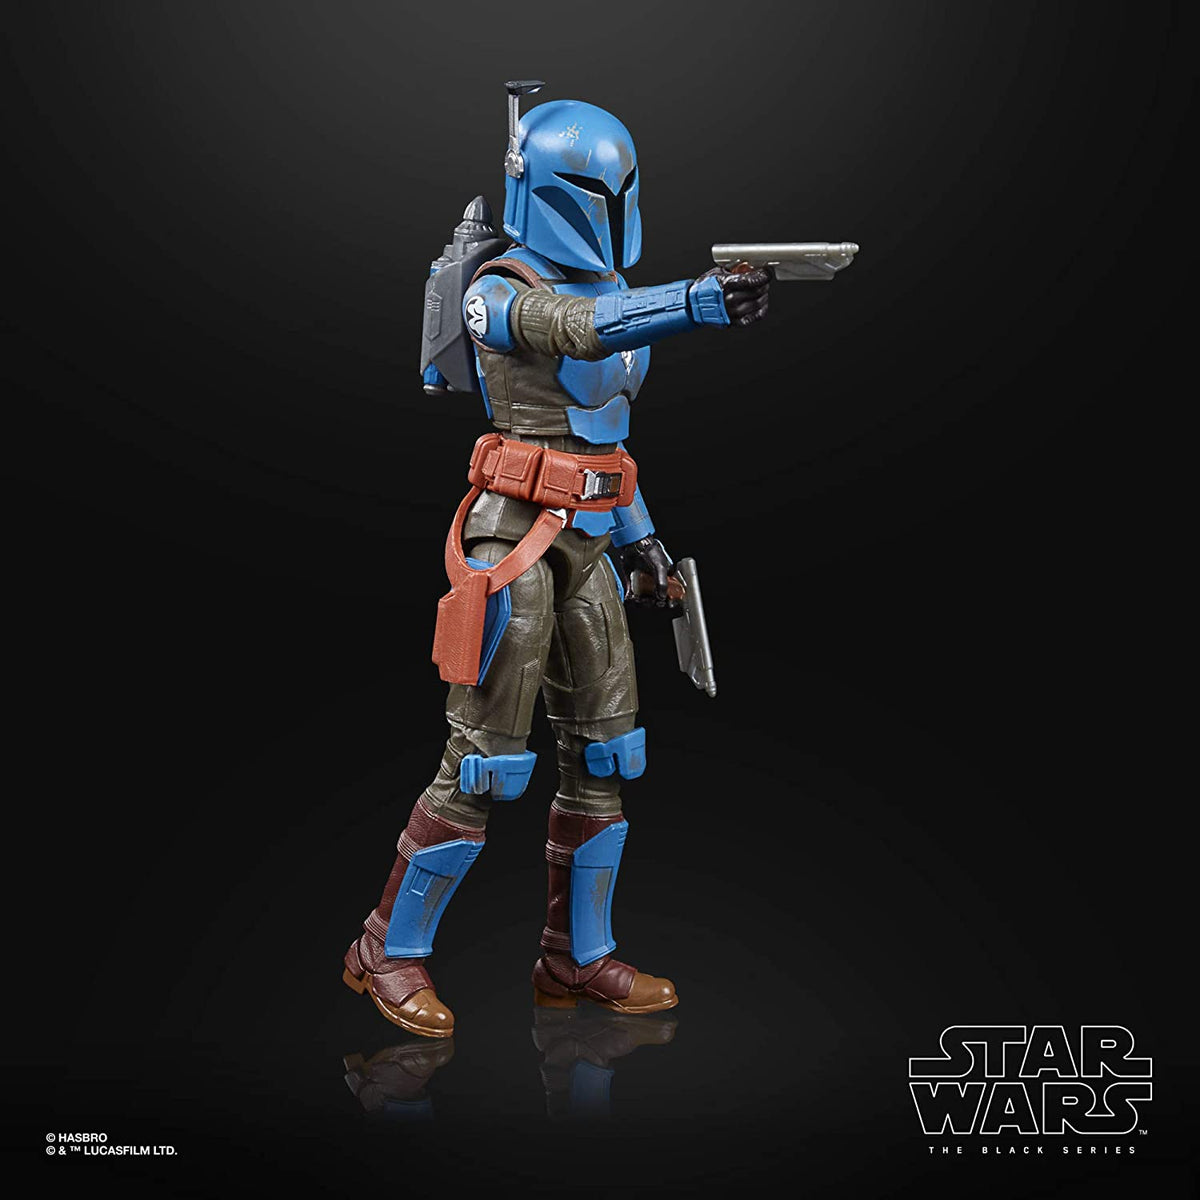 Star Wars The Black Series Koska Reeves Toy The Mandalorian Collectible Figure with Accessories